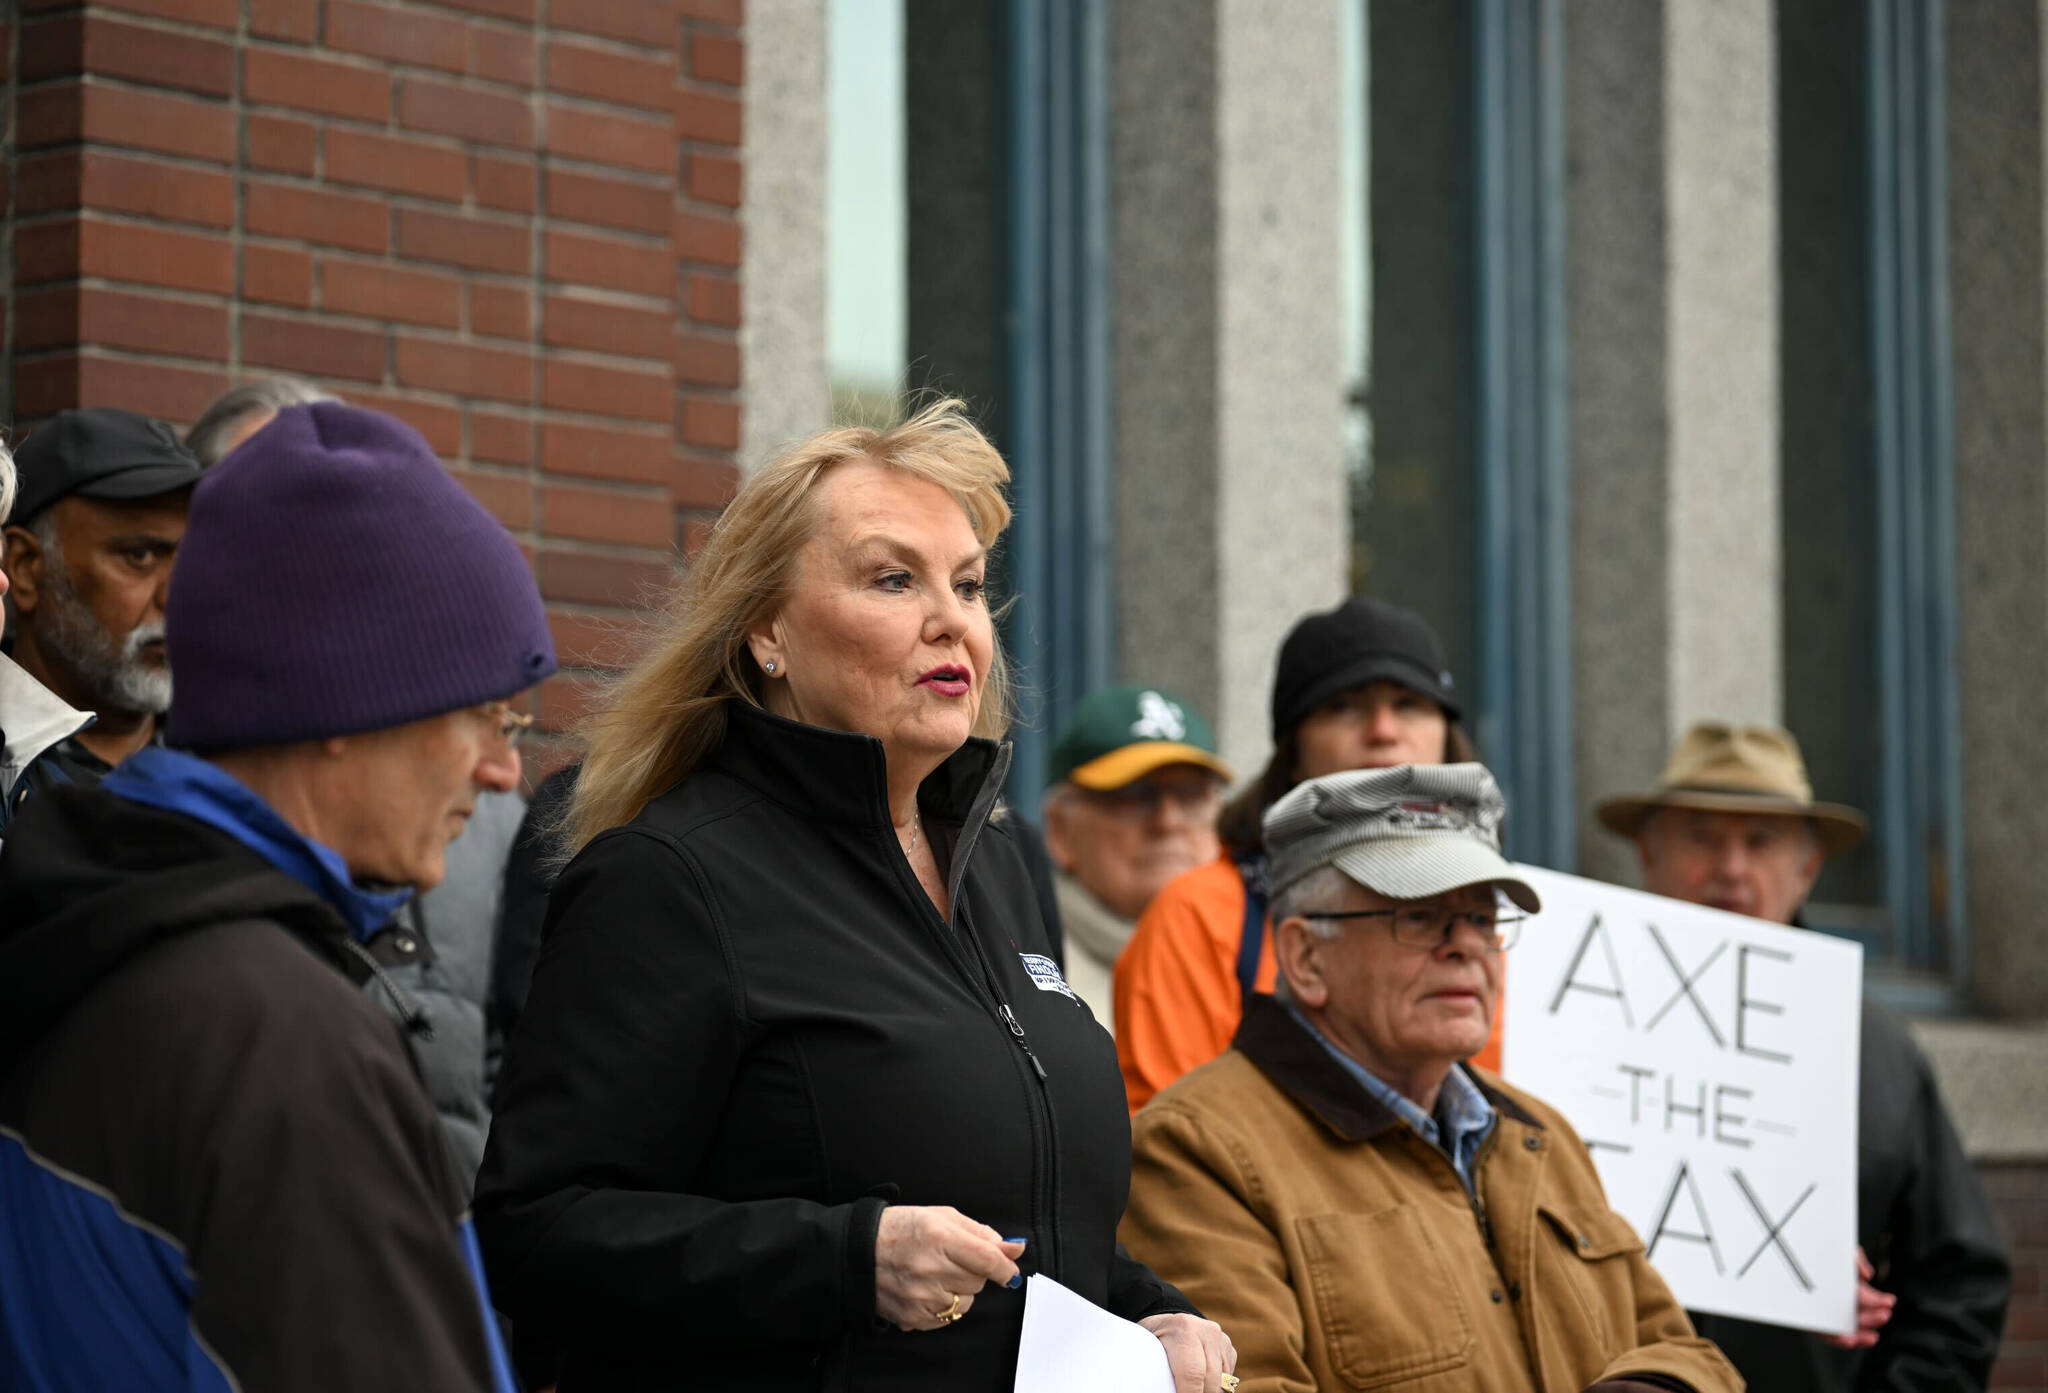 Conservative MP Kerry-Lynne Findlay, representative for South Surrey—White Rock, and Chief Opposition Whip visited Penticton on March 26 to spur local opposition to the federal carbon tax. (Brennan Phillips - Western News)